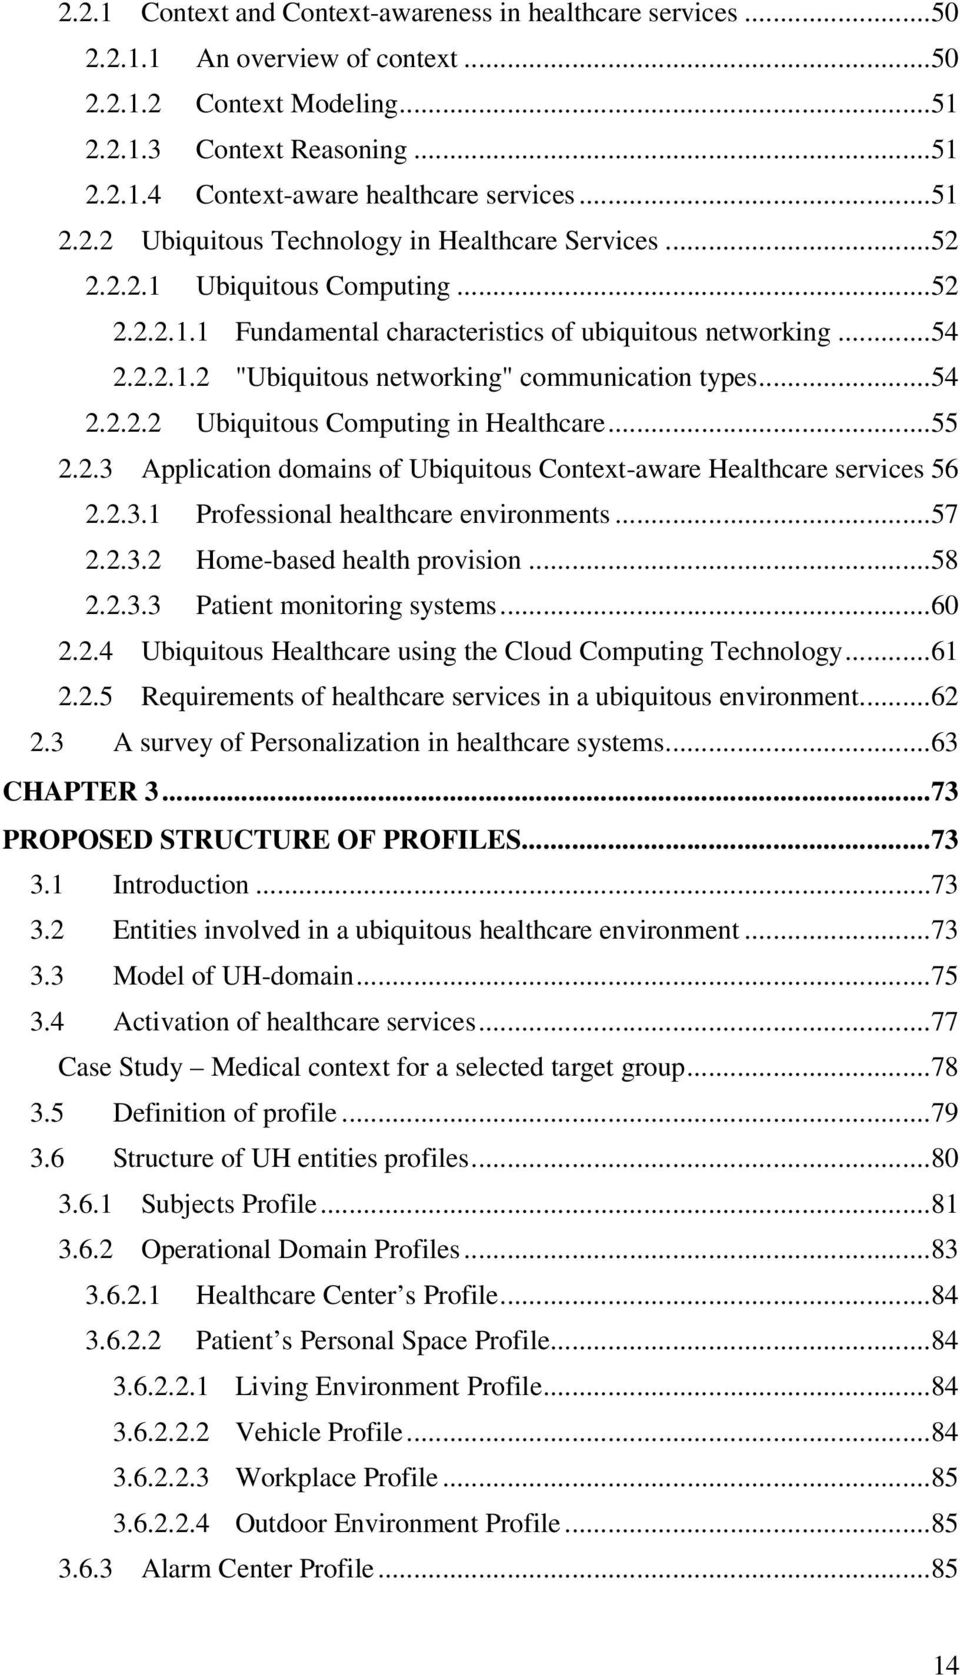 ..54 2.2.2.2 Ubiquitous Computing in Healthcare...55 2.2.3 Application domains of Ubiquitous Context-aware Healthcare services 56 2.2.3.1 Professional healthcare environments...57 2.2.3.2 Home-based health provision.